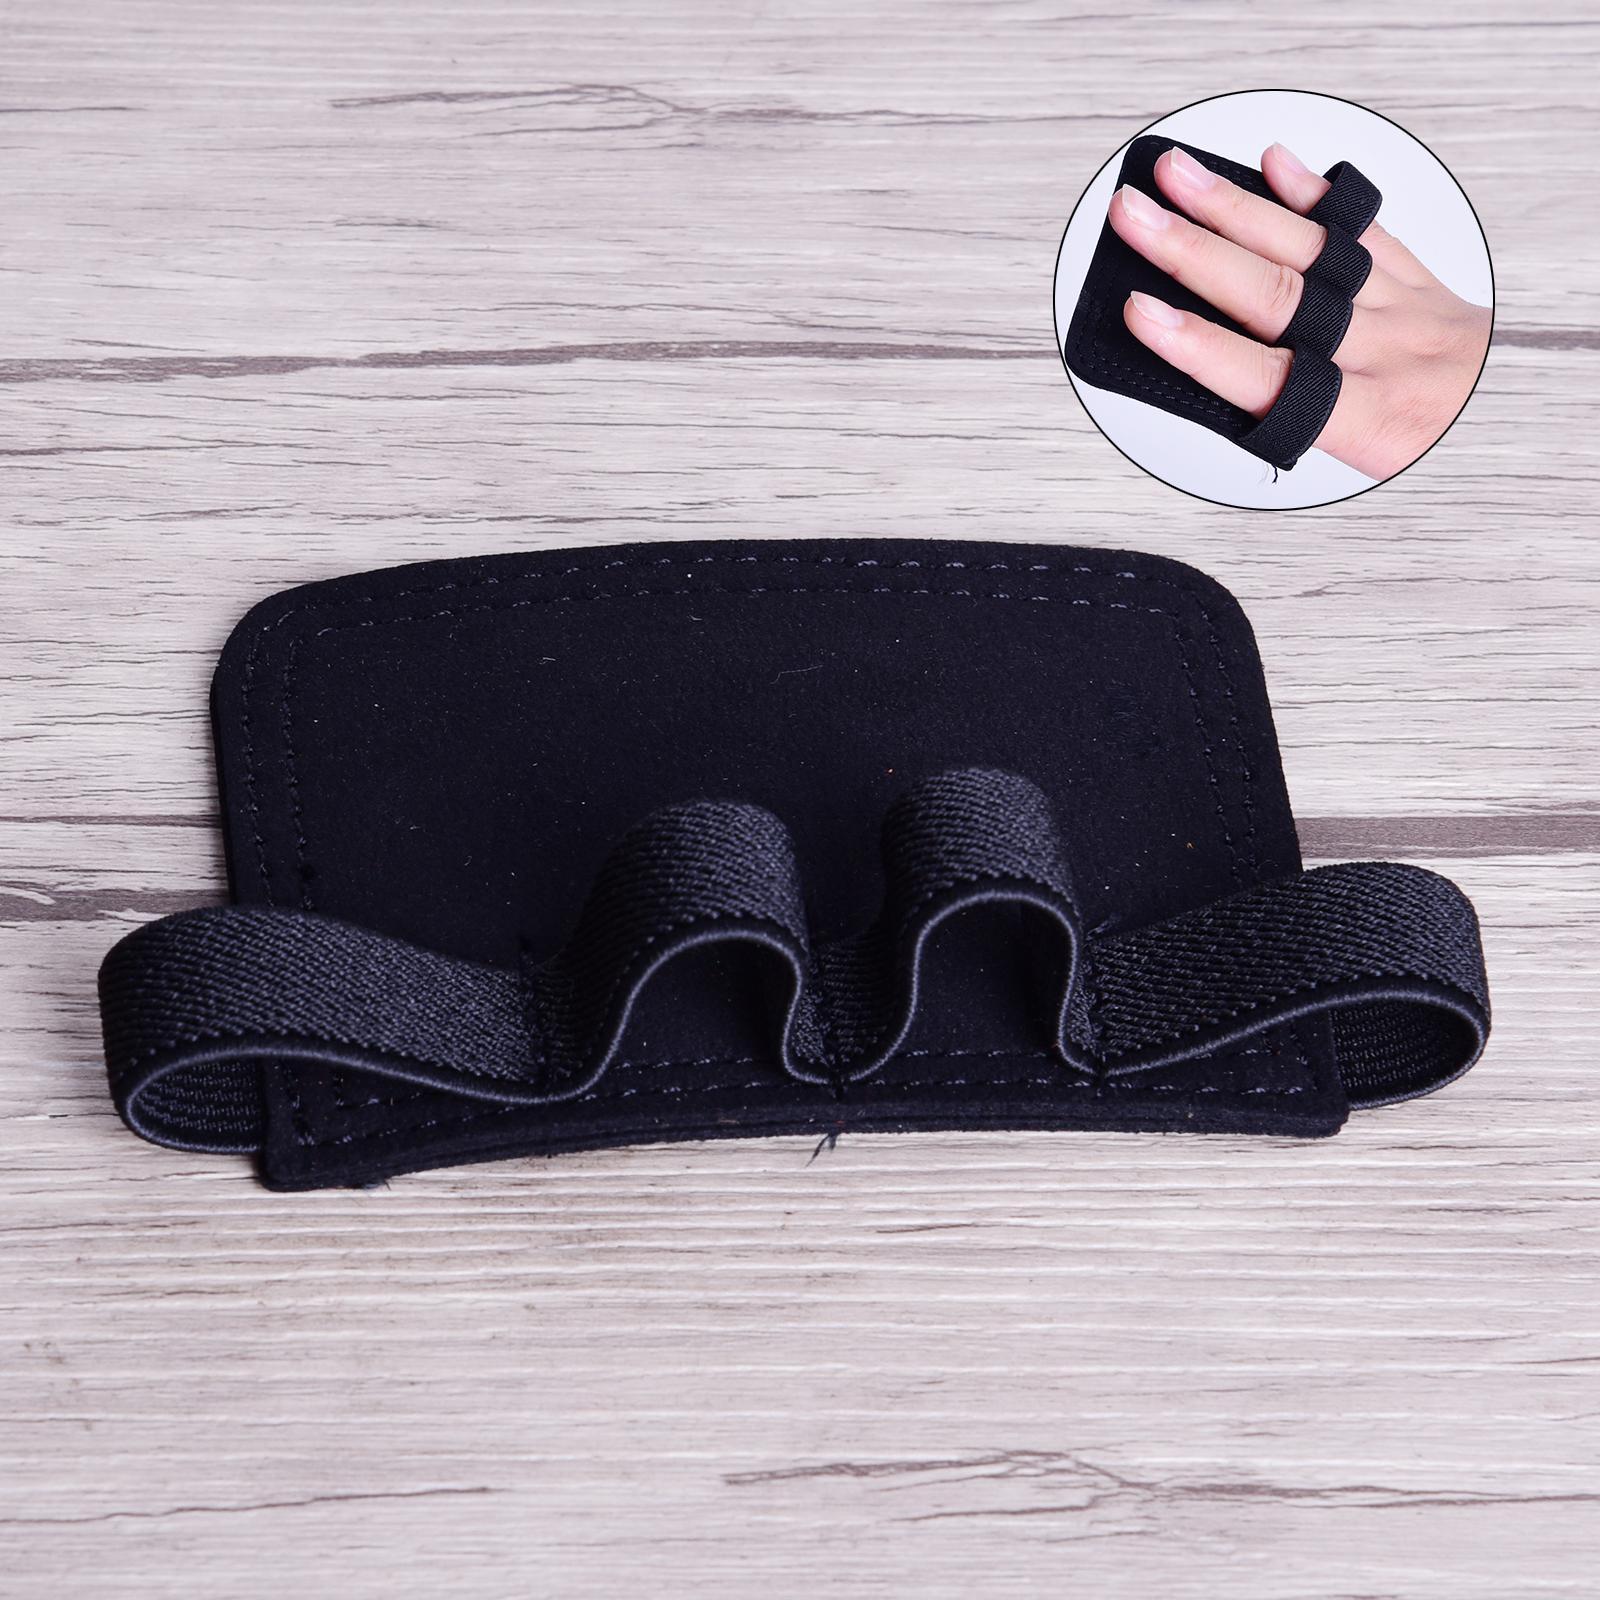 1 Pair Weight Lifting Palm Grips Strength Training Gym Hand 4 Finger Gloves